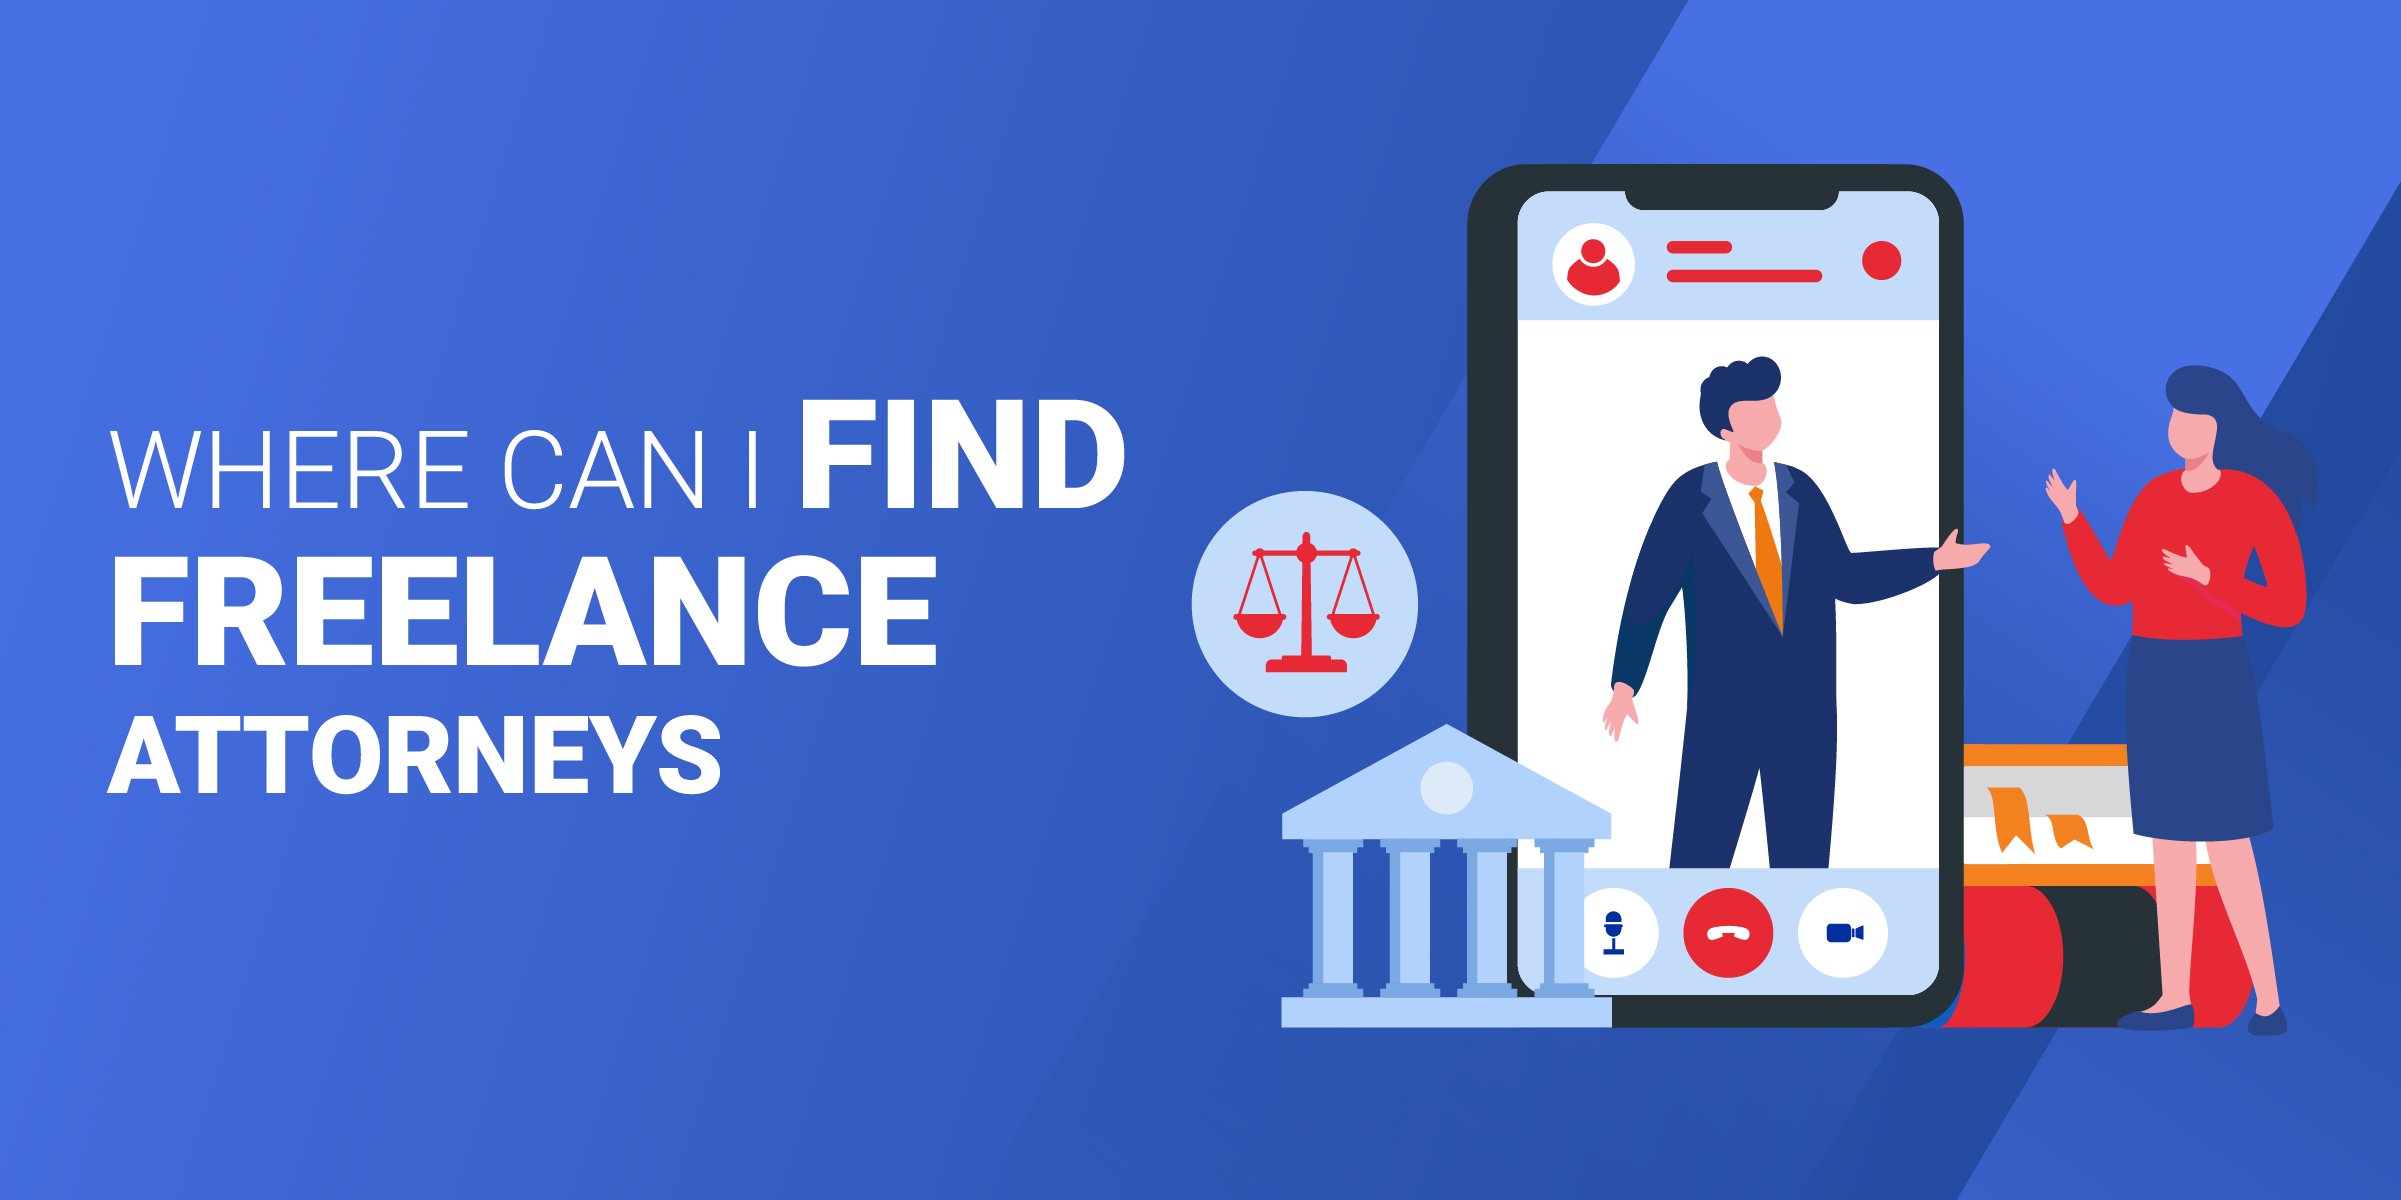 Where Can I Find Freelance Attorneys